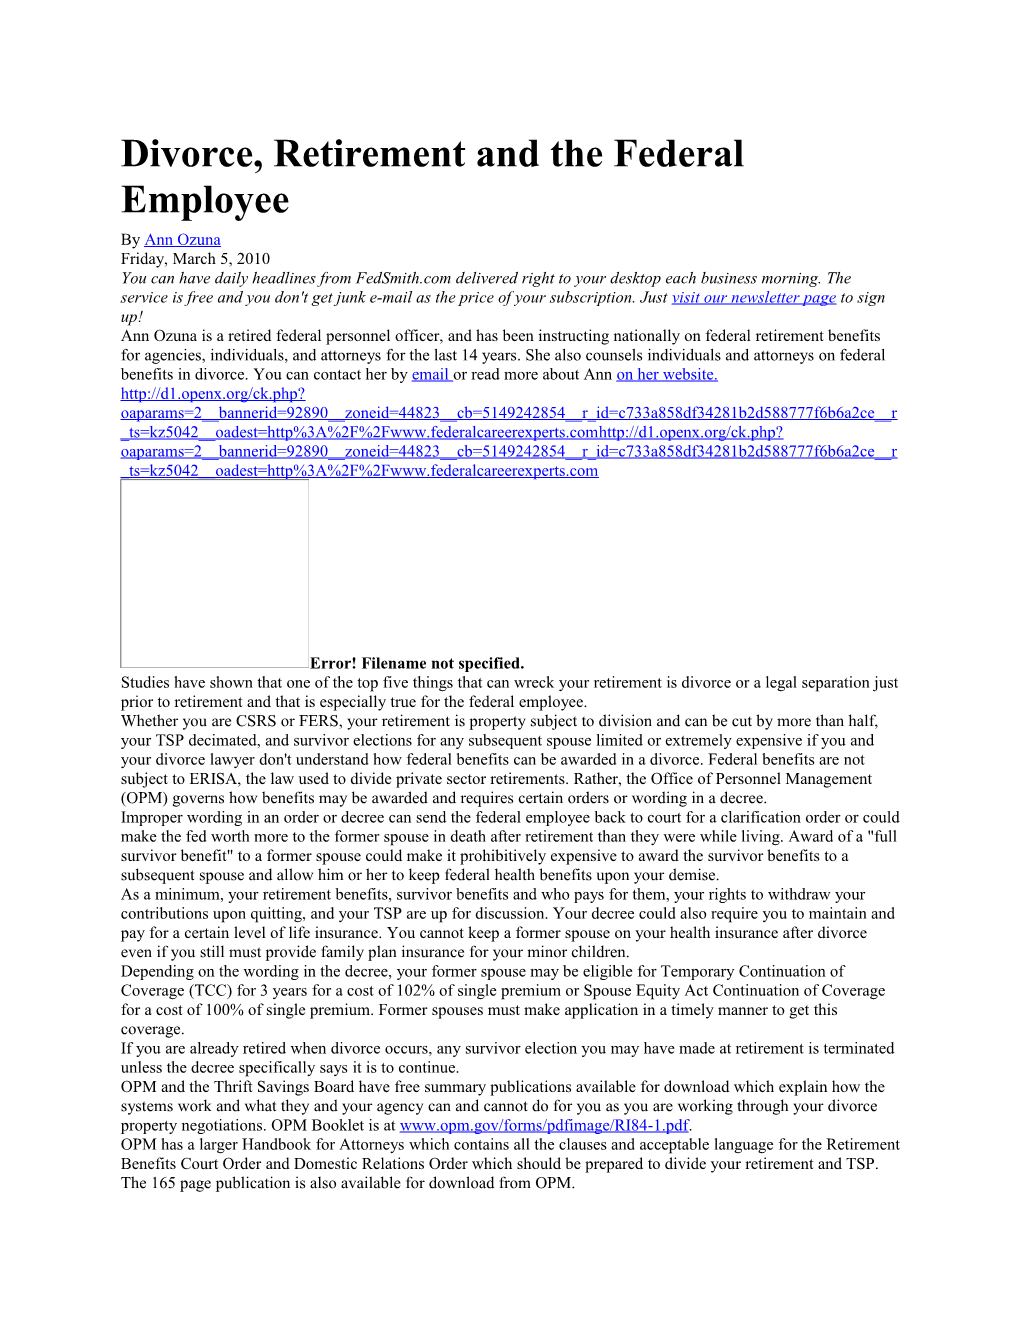 Divorce, Retirement and the Federal Employee